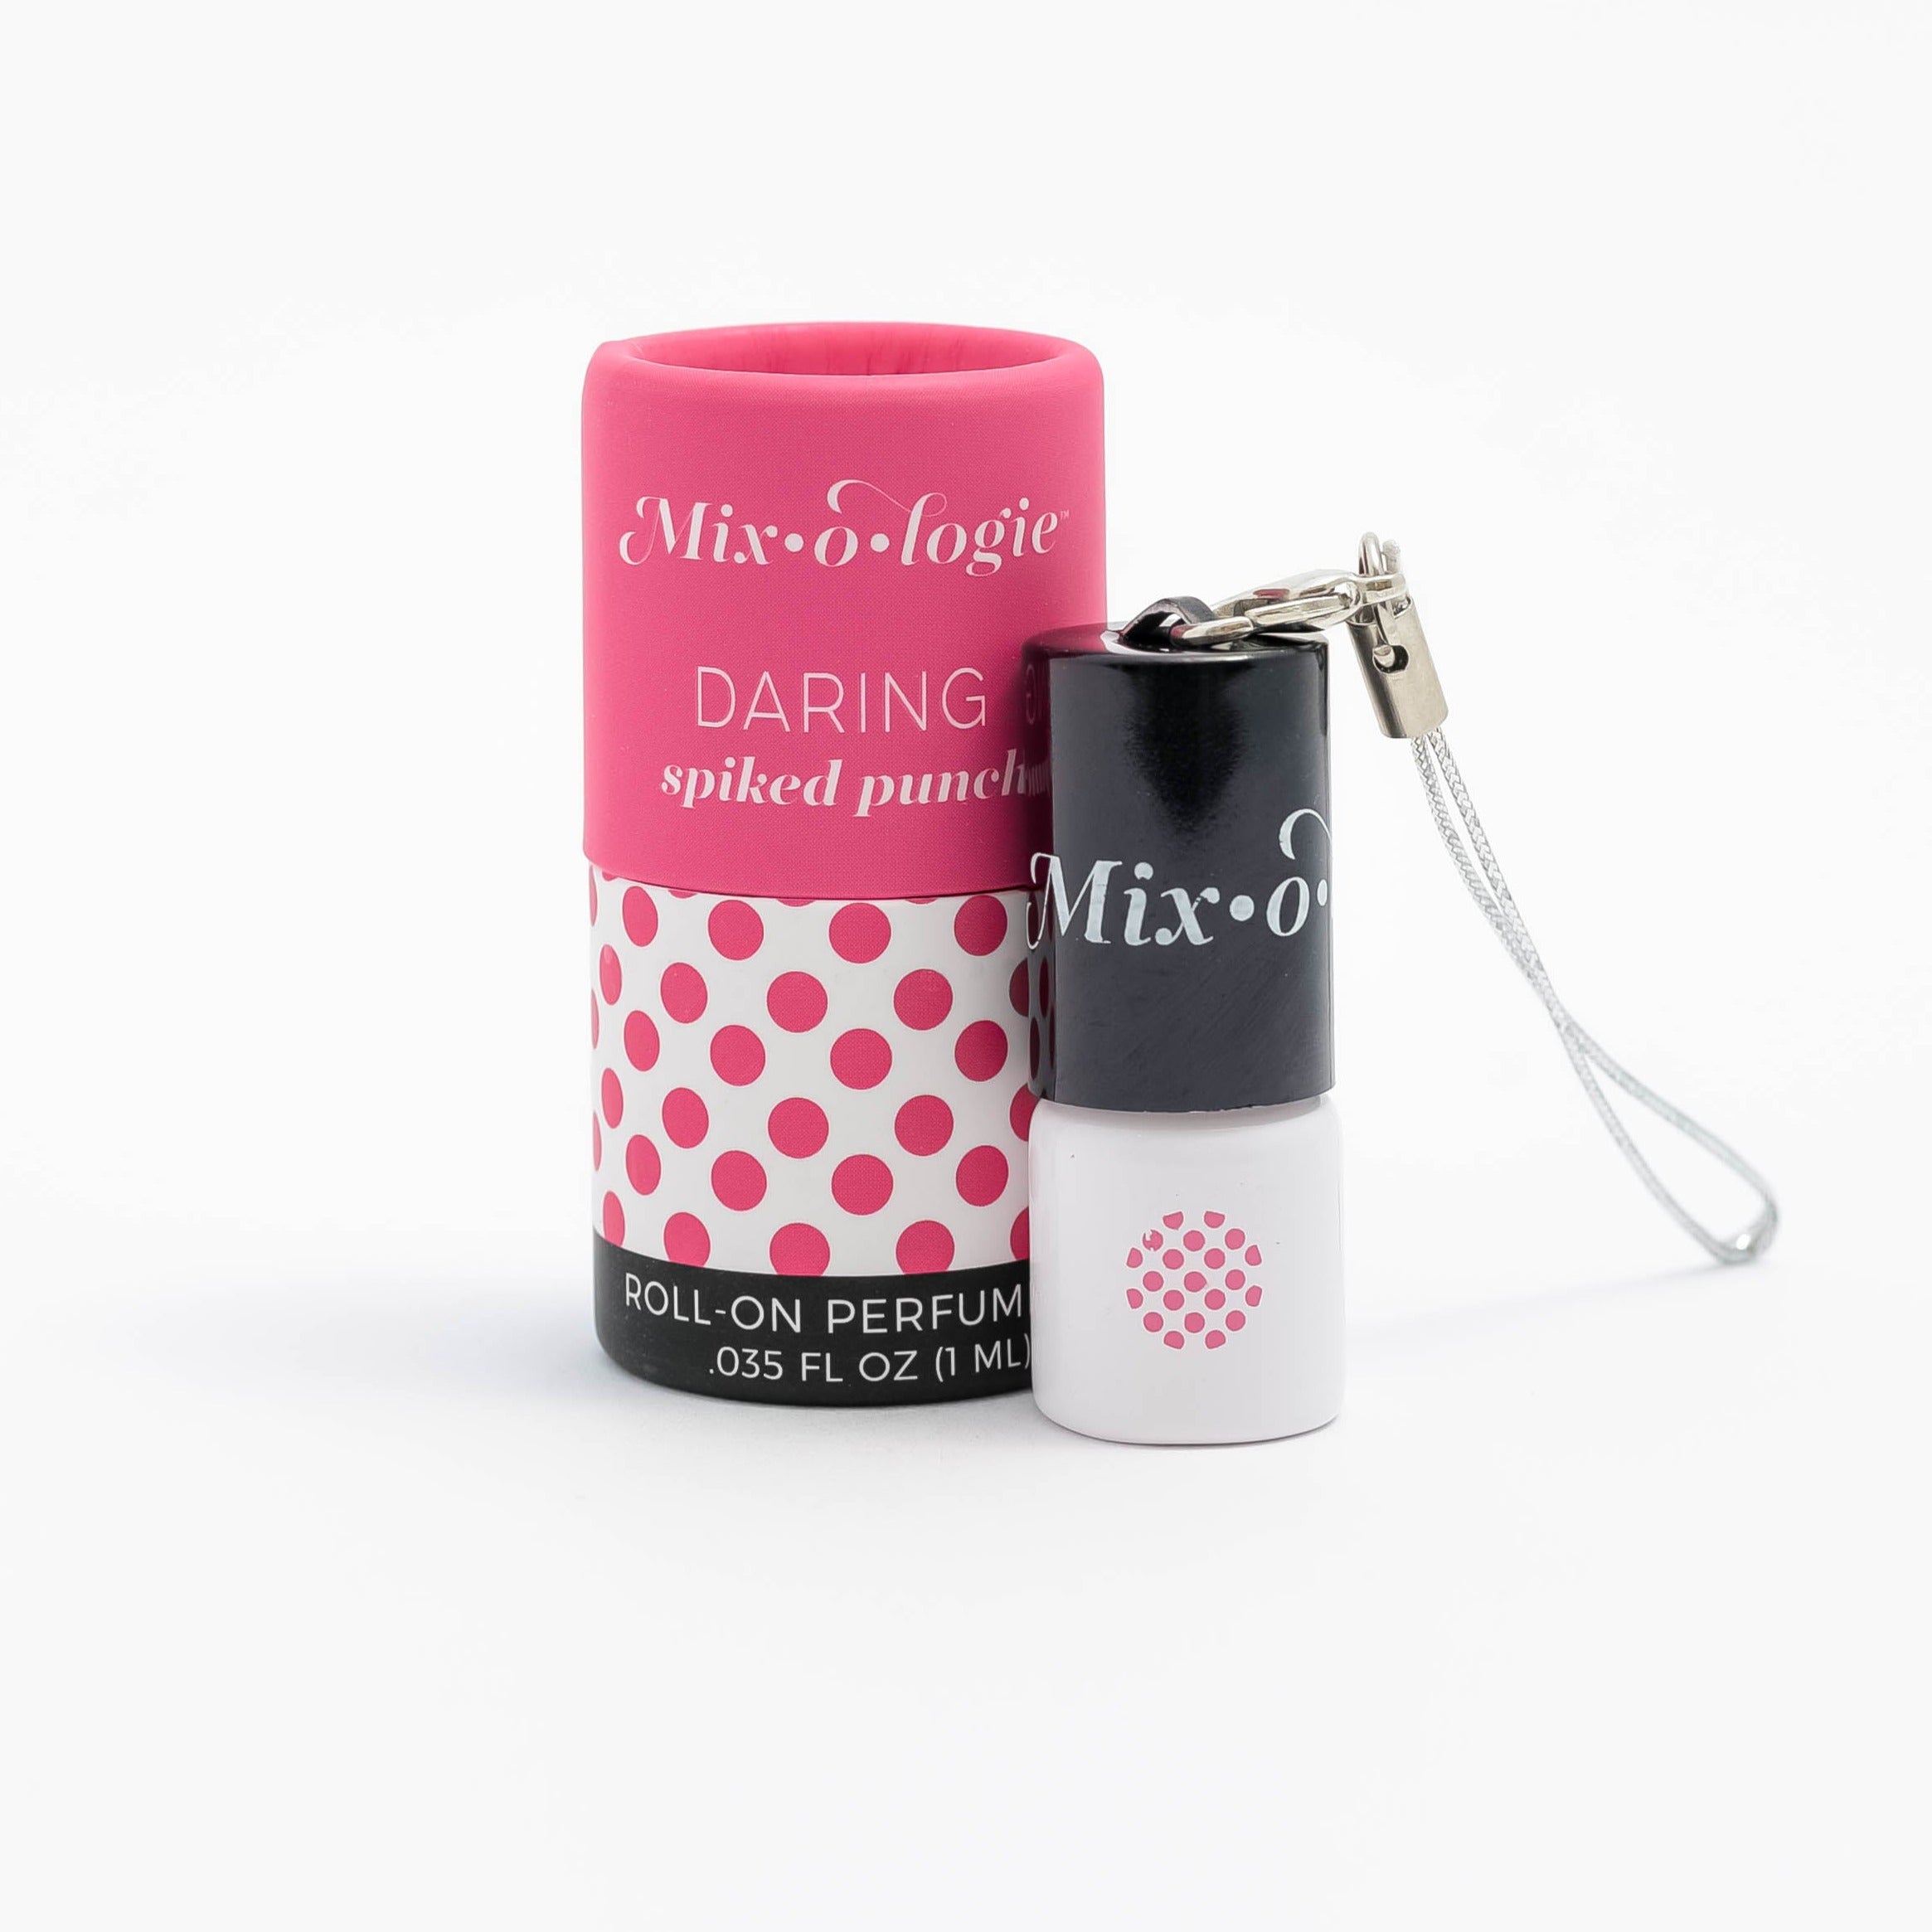 Daring (Spiked Punch) mini white cylinder rollerballs with black top and keychain attachment lid with bright pink polka dots has .035 fl oz or 1 mL.